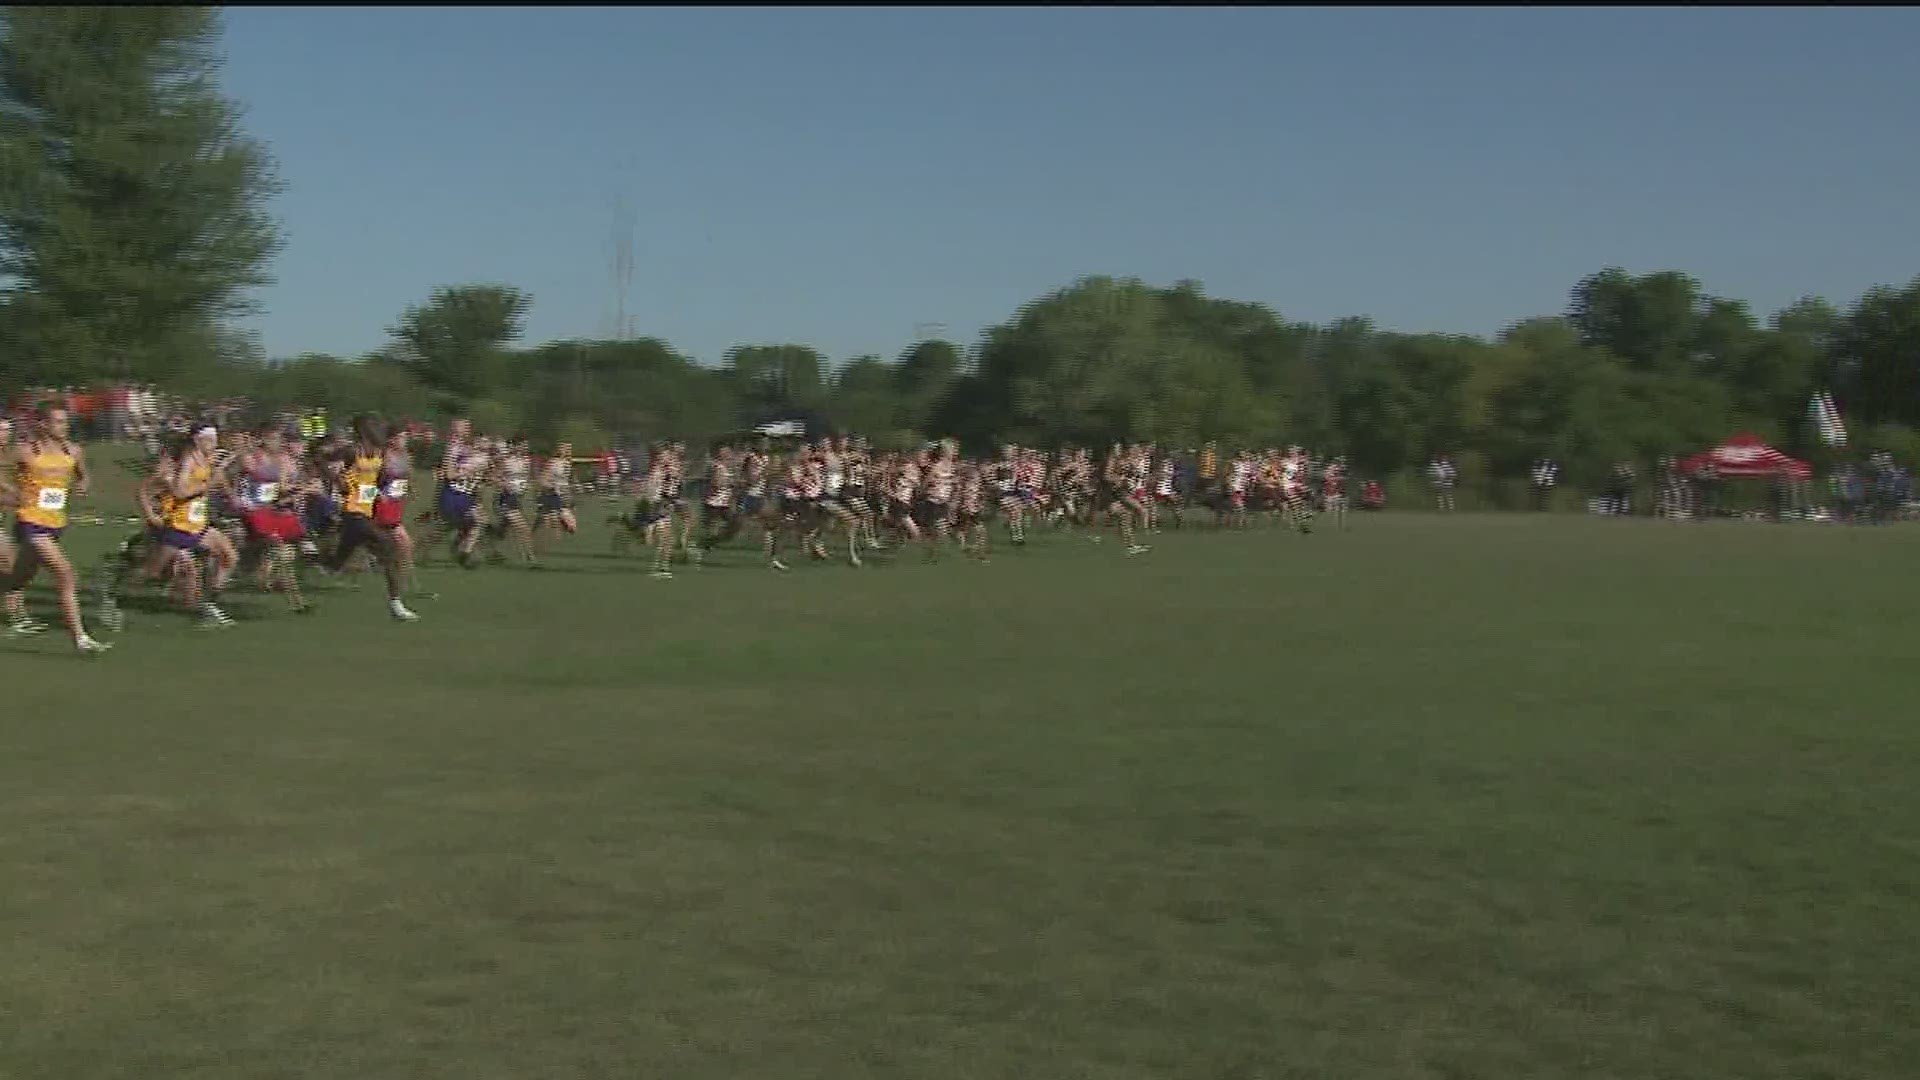 Runners from near and far hit the course at Crow Creek Park which features three challenging hills.